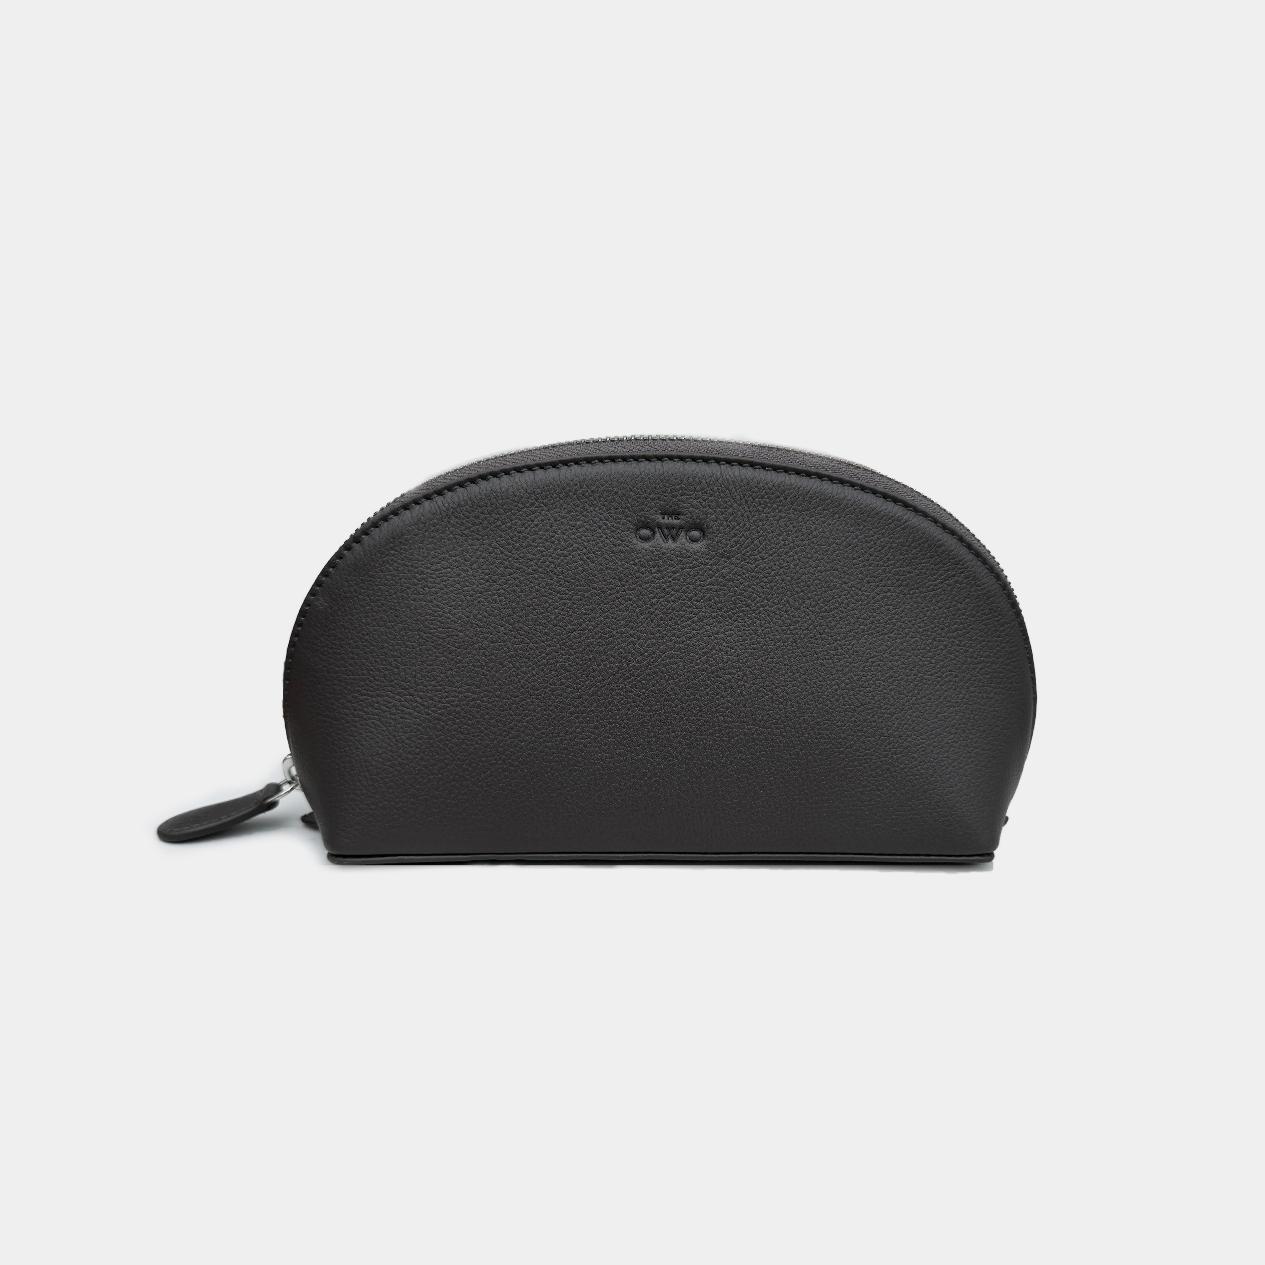 Leather makeup bag designed to hold your cosmetics, brand with your Company logo.